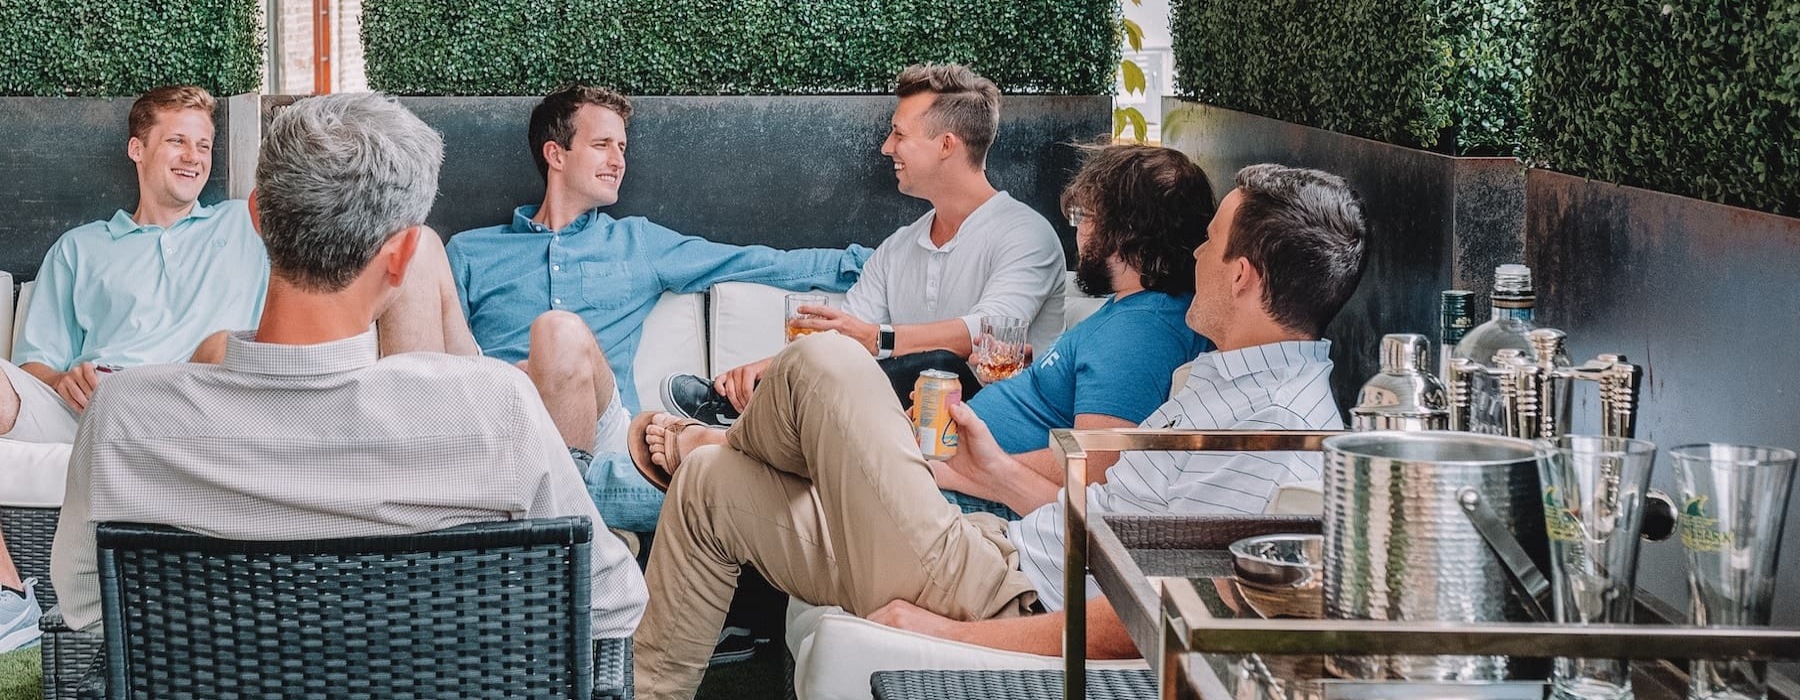 lifestyle image of a group of people laughing and socializing